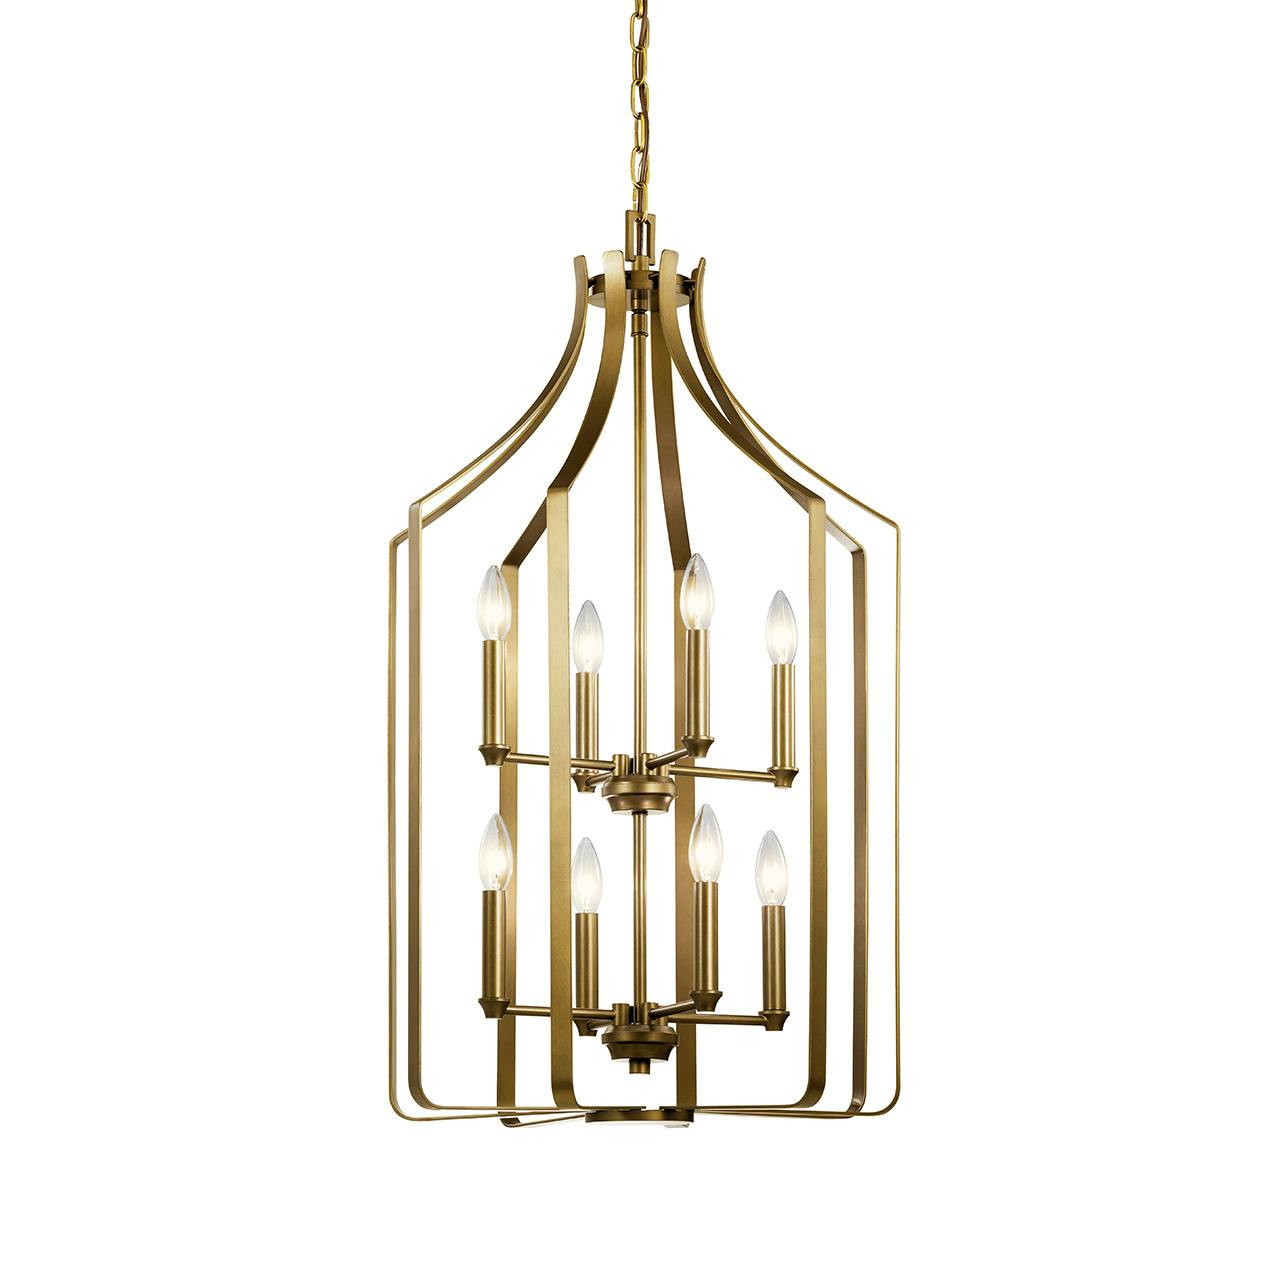 Morrigan 19" Foyer Chandelier Brass without the canopy on a white background